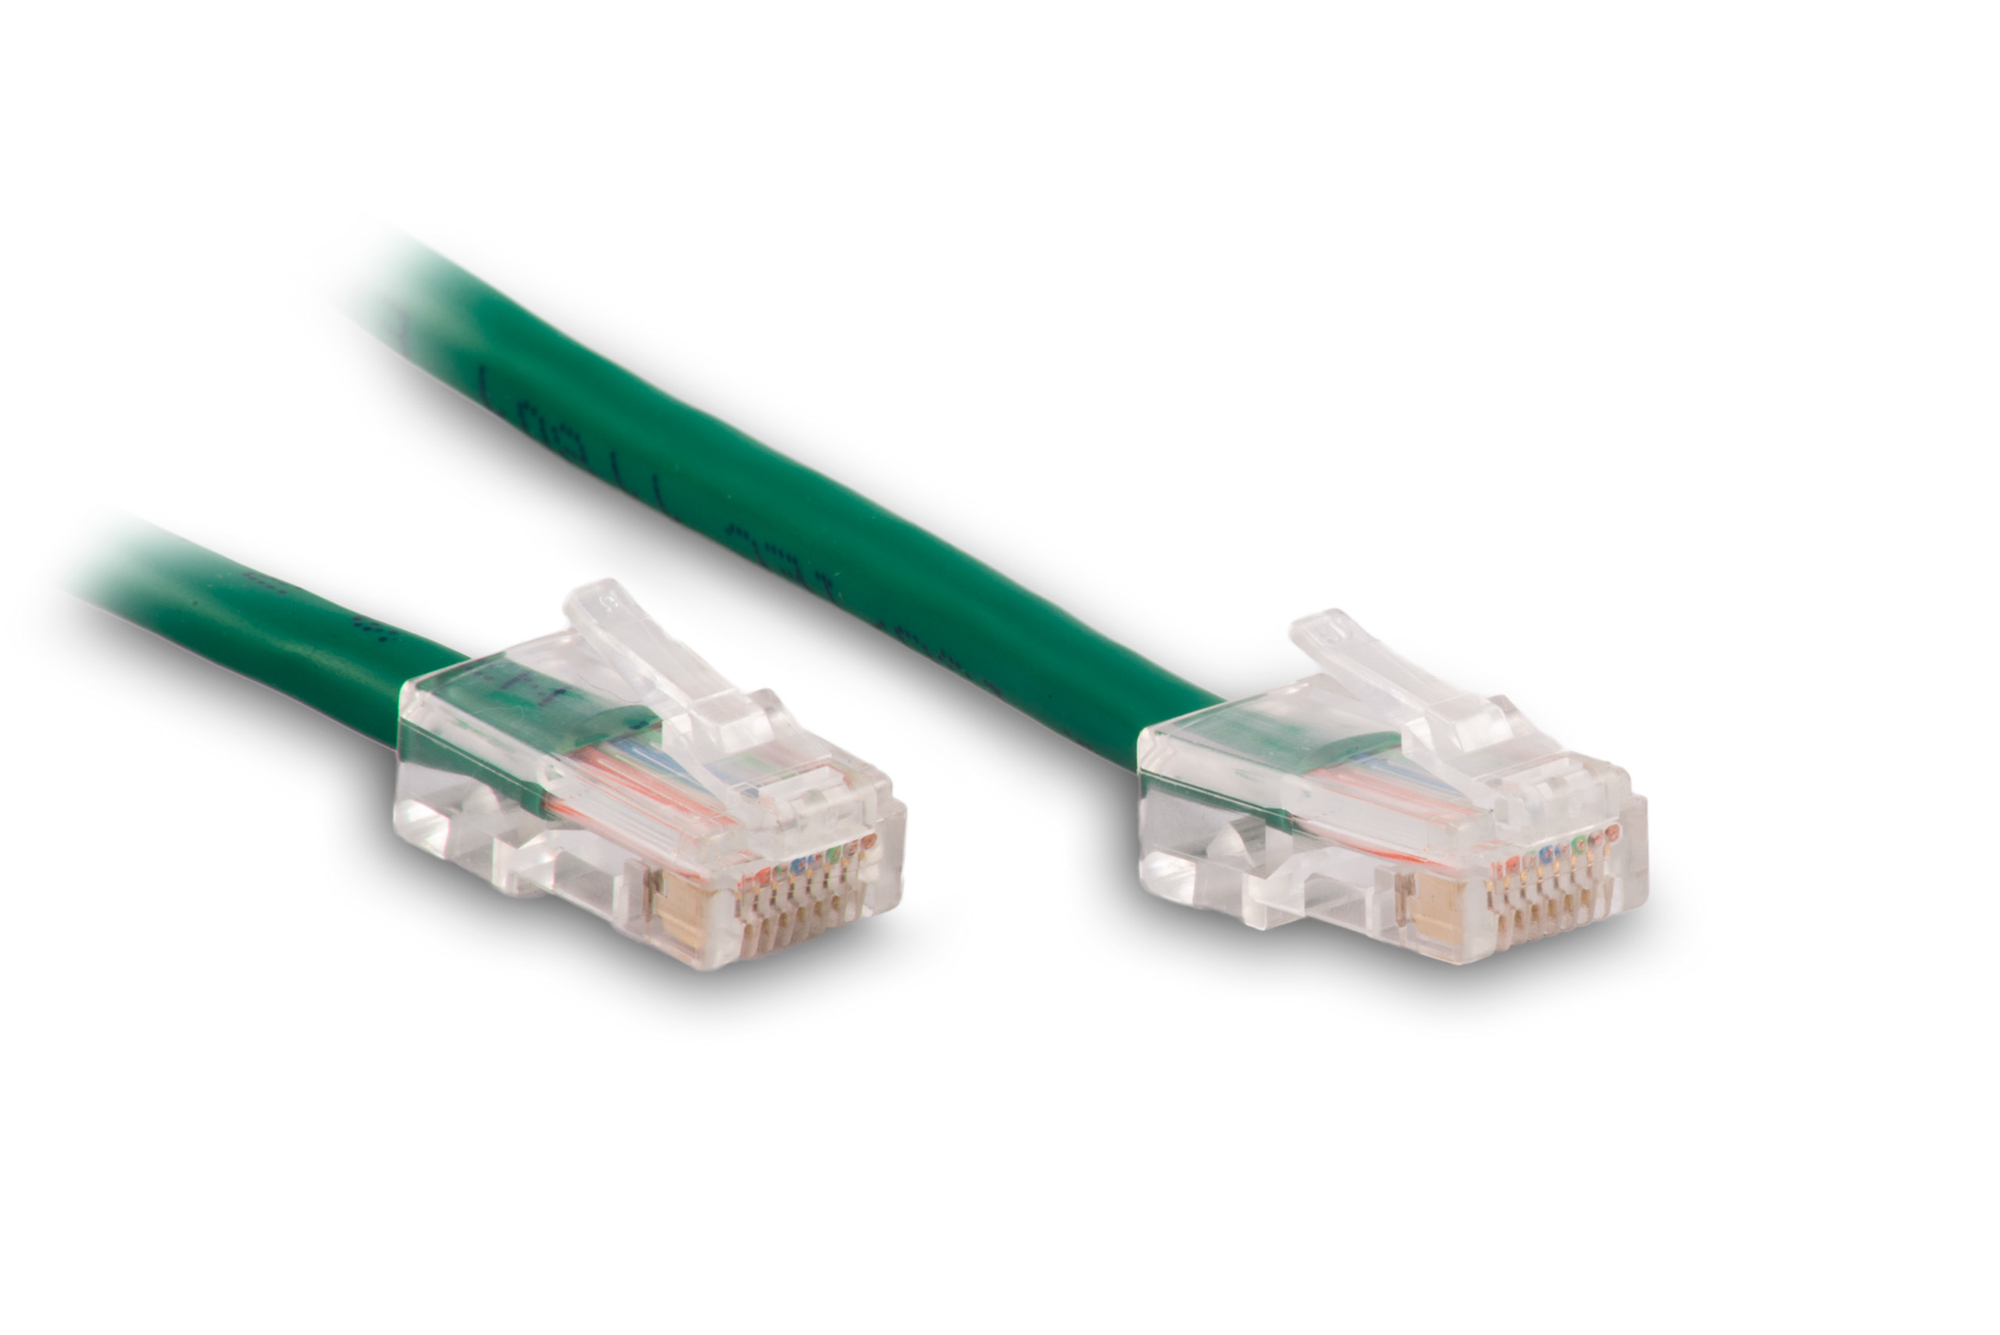 Bootless CNE14709 10-Feet Cat6 Green Ethernet Patch Cable Pack of 3 